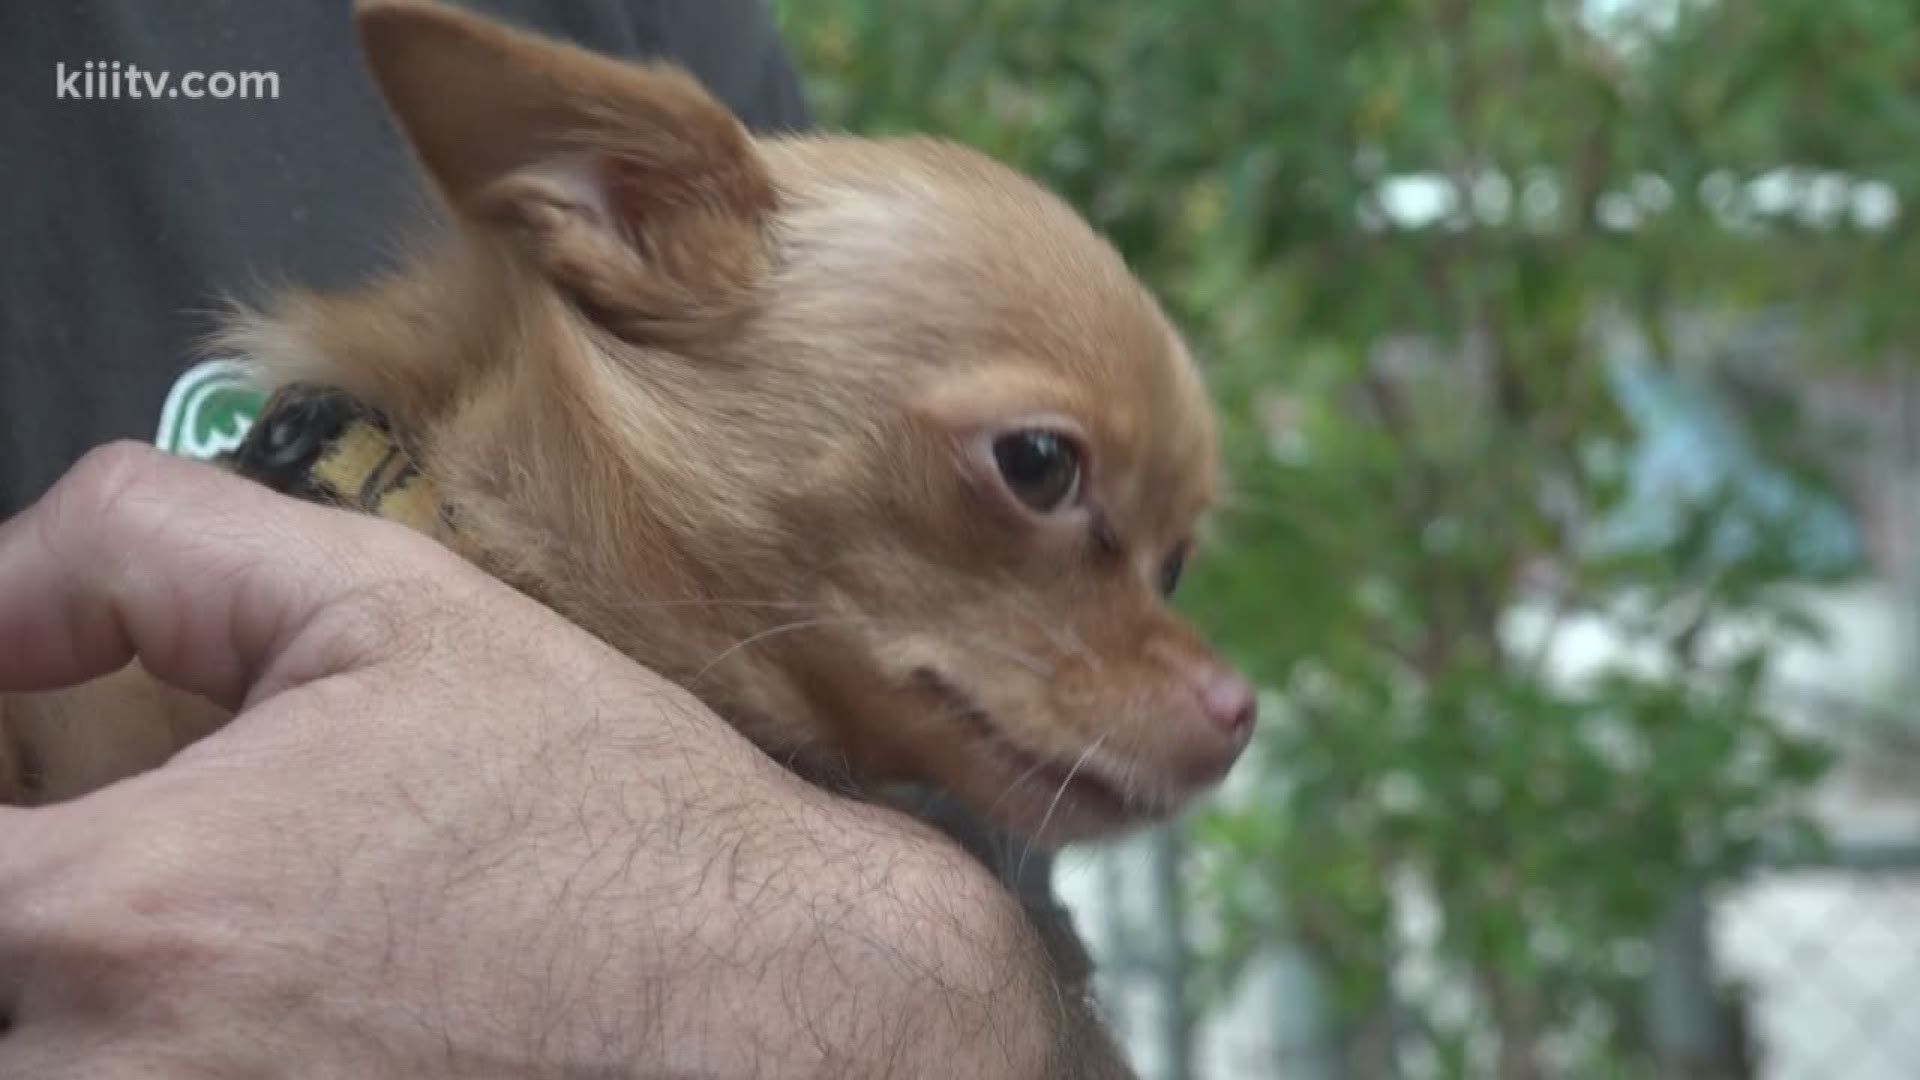 A new program aimed at helping pet owners in under-served communities launched in Corpus Christi.